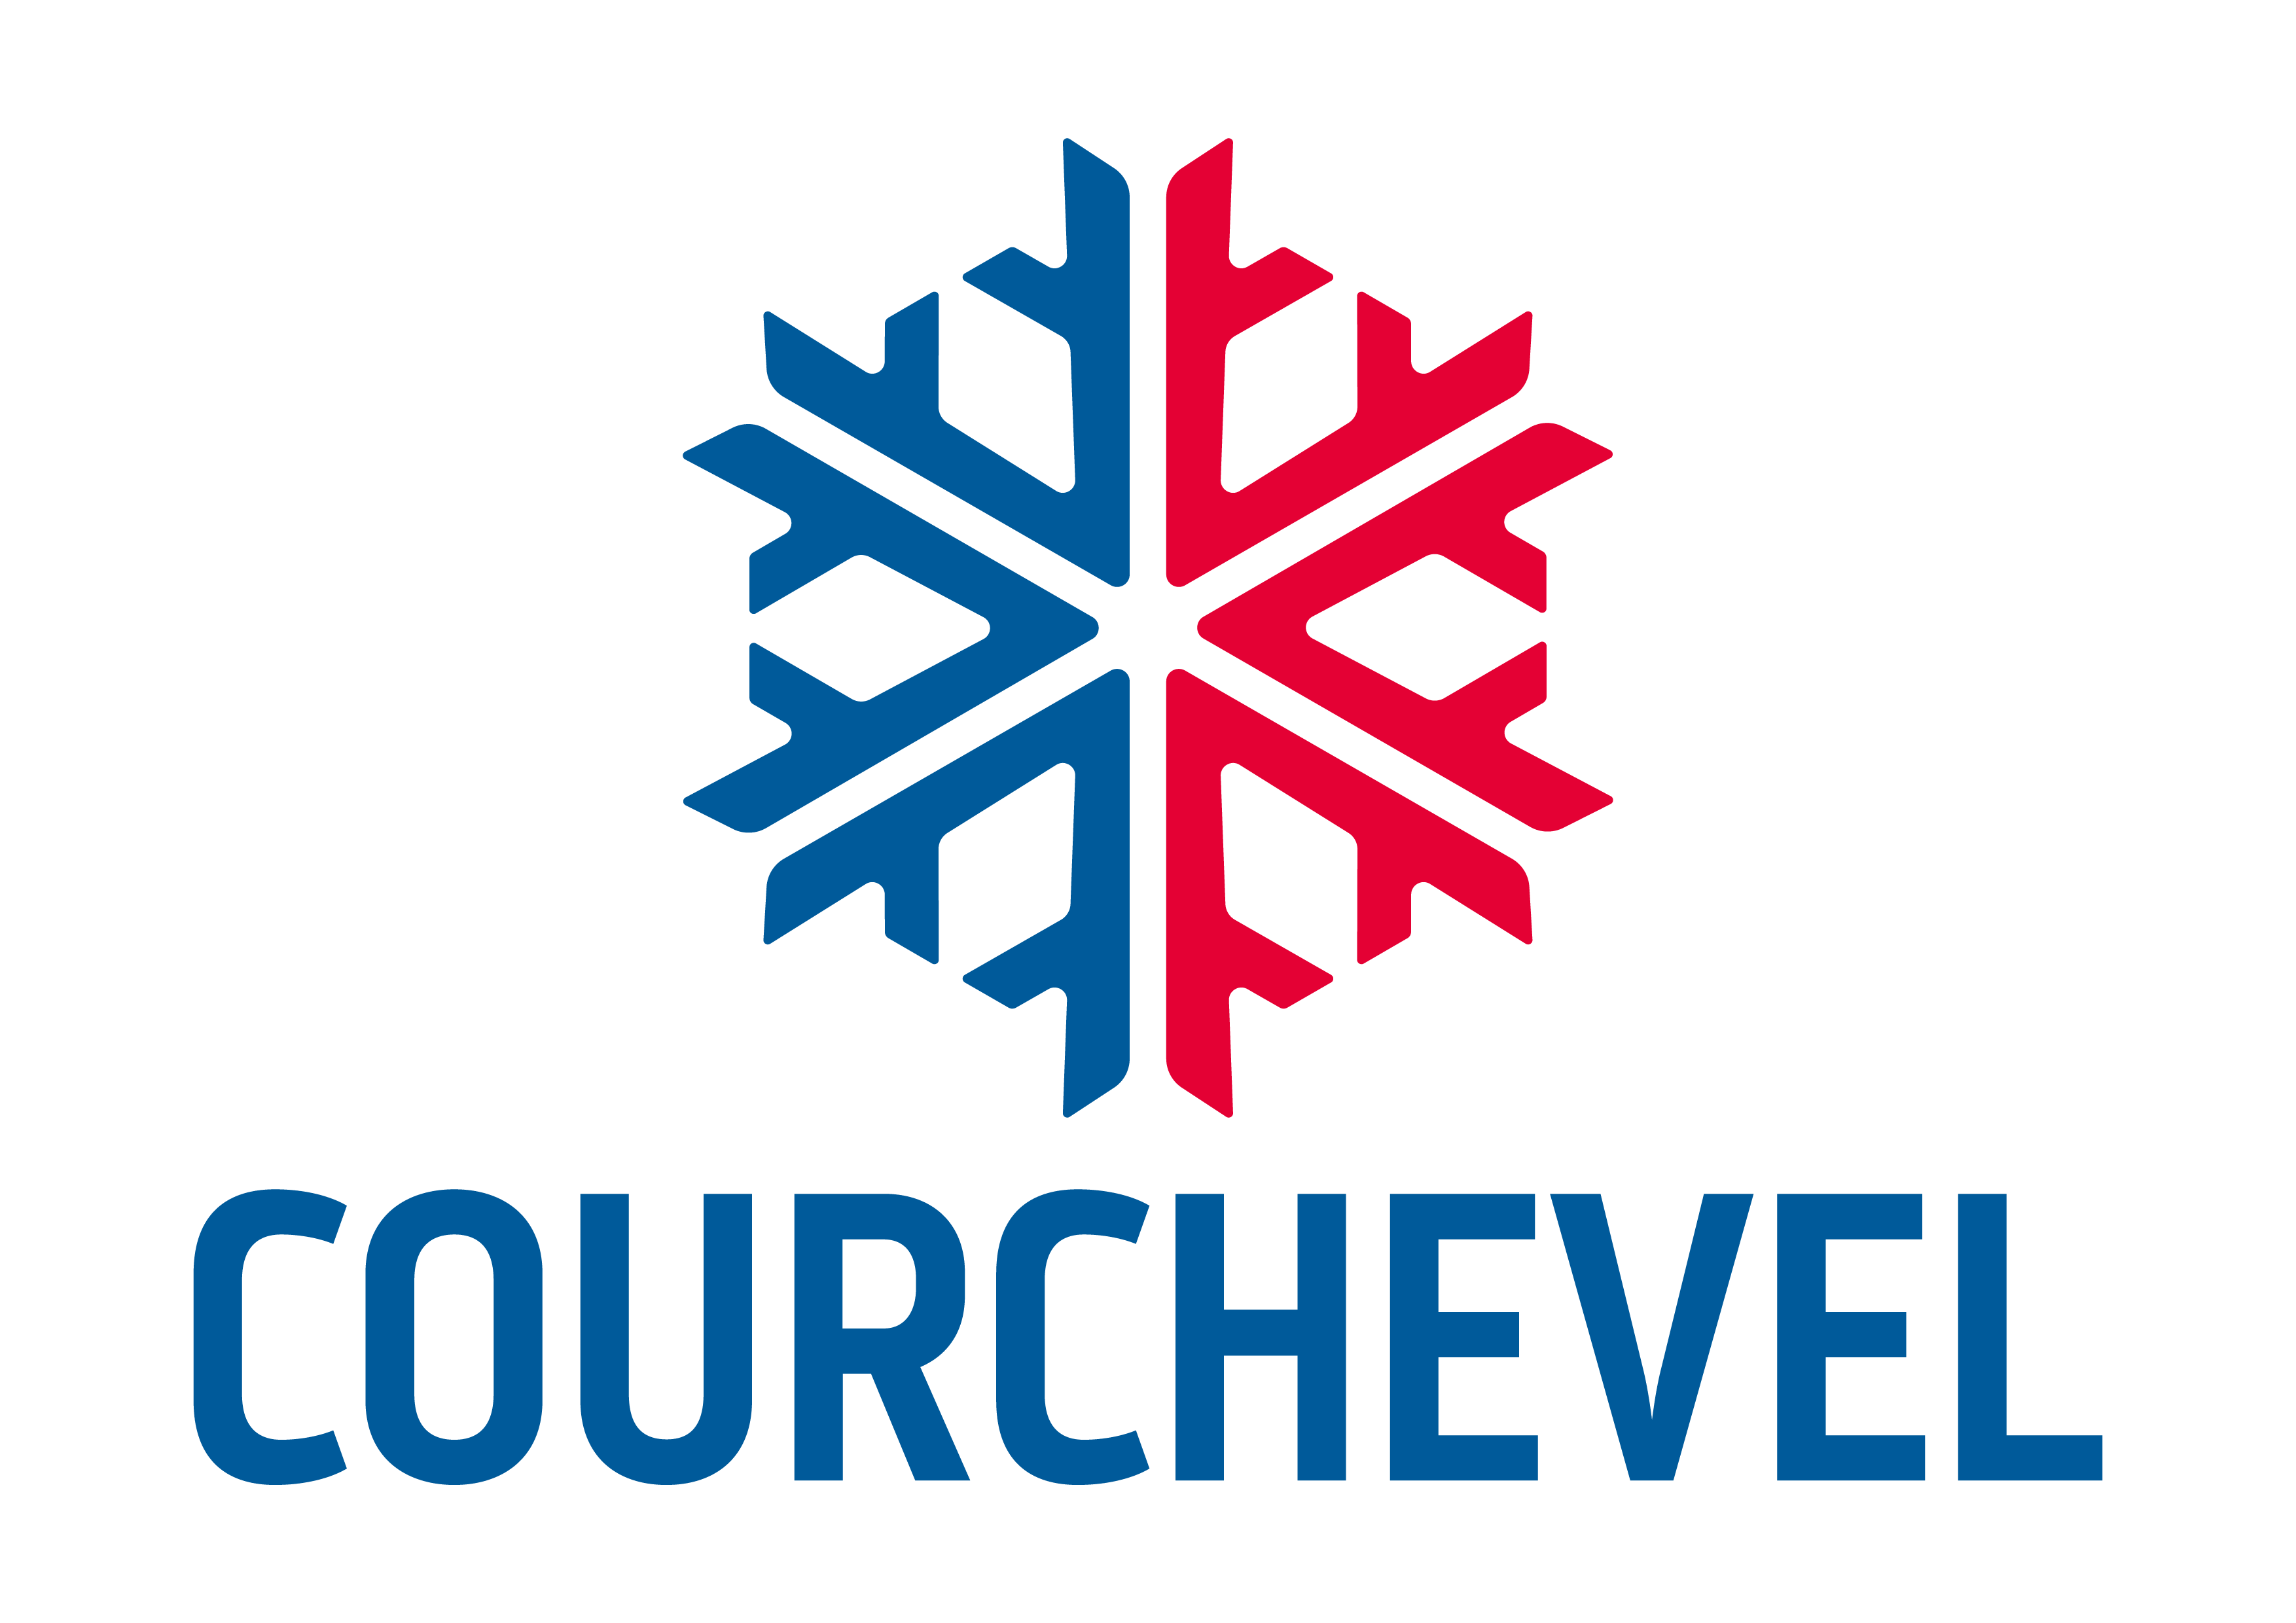 {"id":1,"name":"Courchevel","logo":"\/stations\/station-courchevel.svg","content":"<p>An elegant, modern resort situated in the heart of Les 3 Vall\u00e9es ski area, Courchevel never ceases to evolve and redefine even its most minute aspects in order to attract its visitors.<\/p>\r\n\r\n<p>Overlooking the Tarentaise valley in Savoie, Courchevel is renowned for its six magical villages which offer visitors diverse atmospheres, each as remarkable as the last. With a wide reputation that attracts people from all over the world who are searching for the best, Courchevel depicts an idea of prestige and high-class sophistication.<\/p>\r\n","main_img":"\/stations\/Courchevel\/courchevel-alpinelodges.jpg","created_at":"2019-11-26 14:49:30","updated_at":"2022-02-14 17:08:53","slug":"courchevel","img_home":"\/cropped-images\/courchevel-sundancelodge-carre-web.jpg","subtitle":"A trendy and dynamic resort","logo_color":"\/stations\/station-courchevel-couleur.png","translations":[{"id":41,"locale":"en","model_id":"1","model_type":"LucasPalomba\\Alpinelodges\\Models\\Station","attribute_data":"{\"name\":\"Courchevel\",\"content\":\"<p>An elegant, modern resort situated in the heart of Les 3 Vall\u00e9es ski area, Courchevel never ceases to evolve and redefine even its most minute aspects in order to attract its visitors.<\\\/p>\\r\\n\\r\\n<p>Overlooking the Tarentaise valley in Savoie, Courchevel is renowned for its six magical villages which offer visitors diverse atmospheres, each as remarkable as the last. With a wide reputation that attracts people from all over the world who are searching for the best, Courchevel depicts an idea of prestige and high-class sophistication.<\\\/p>\\r\\n\",\"subtitle\":\"A trendy and dynamic resort\"}"}]} station image